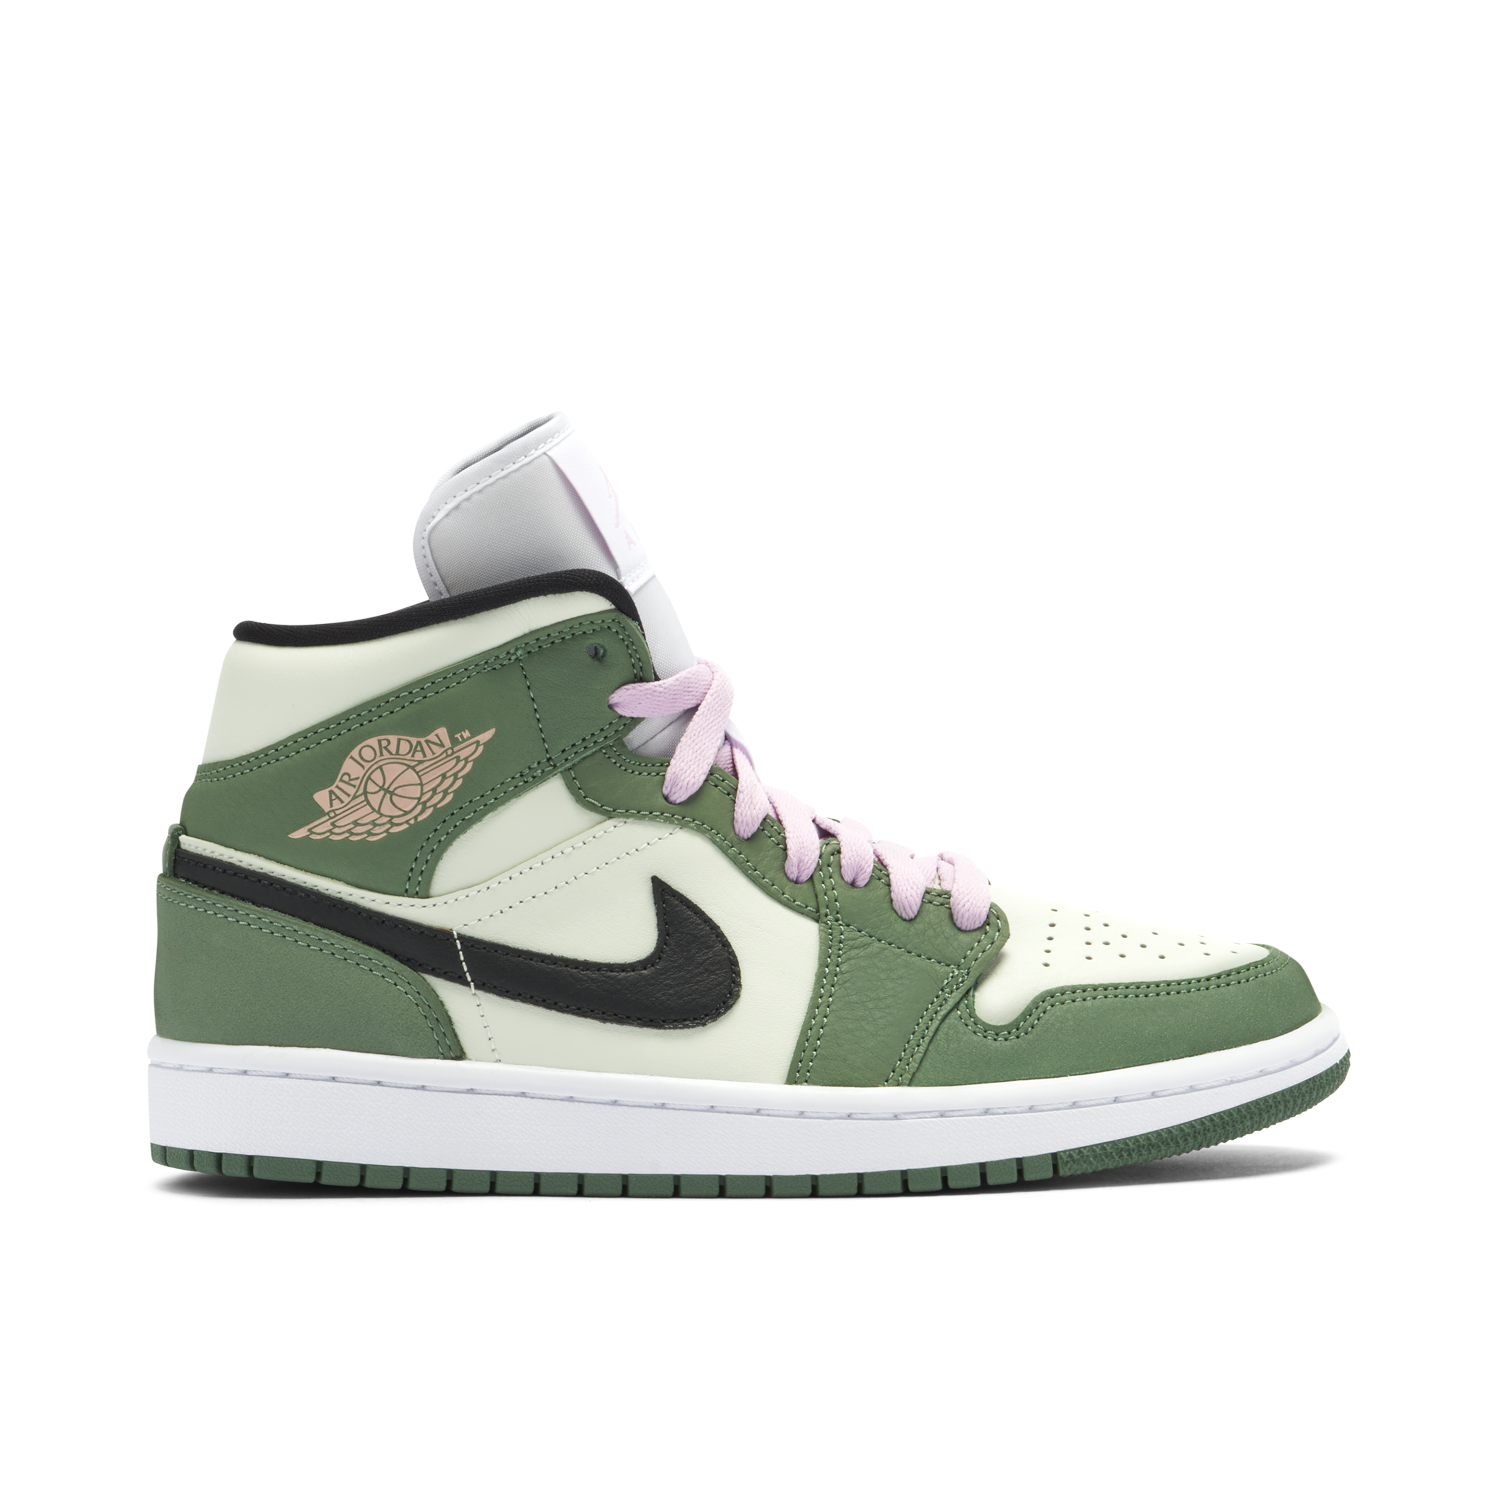 green jordan 1s with pink laces